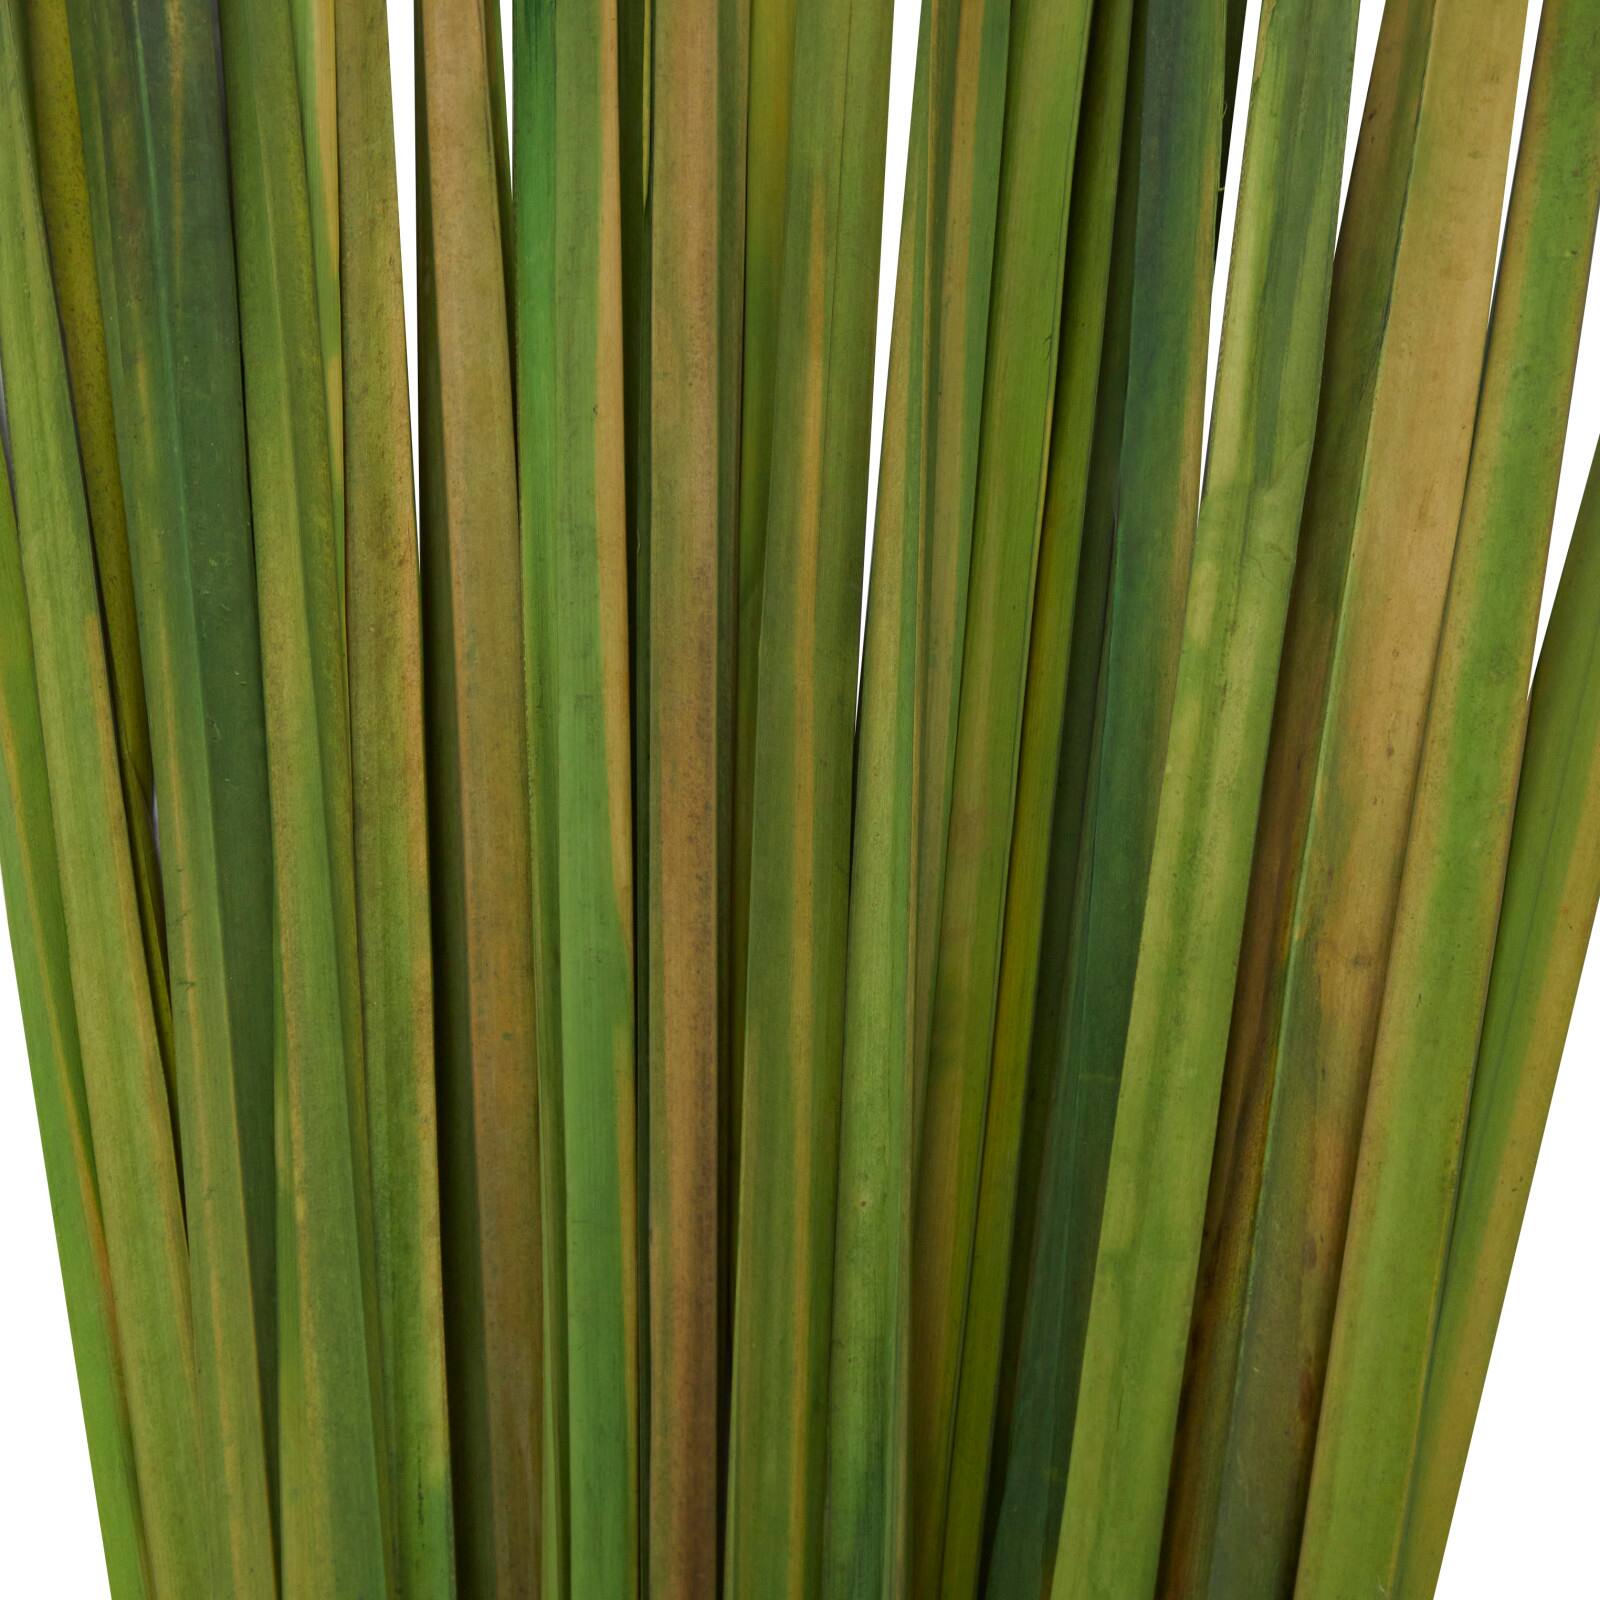 39&#x22; Dried Plant Sticks Natural Foliage With Slender Stems